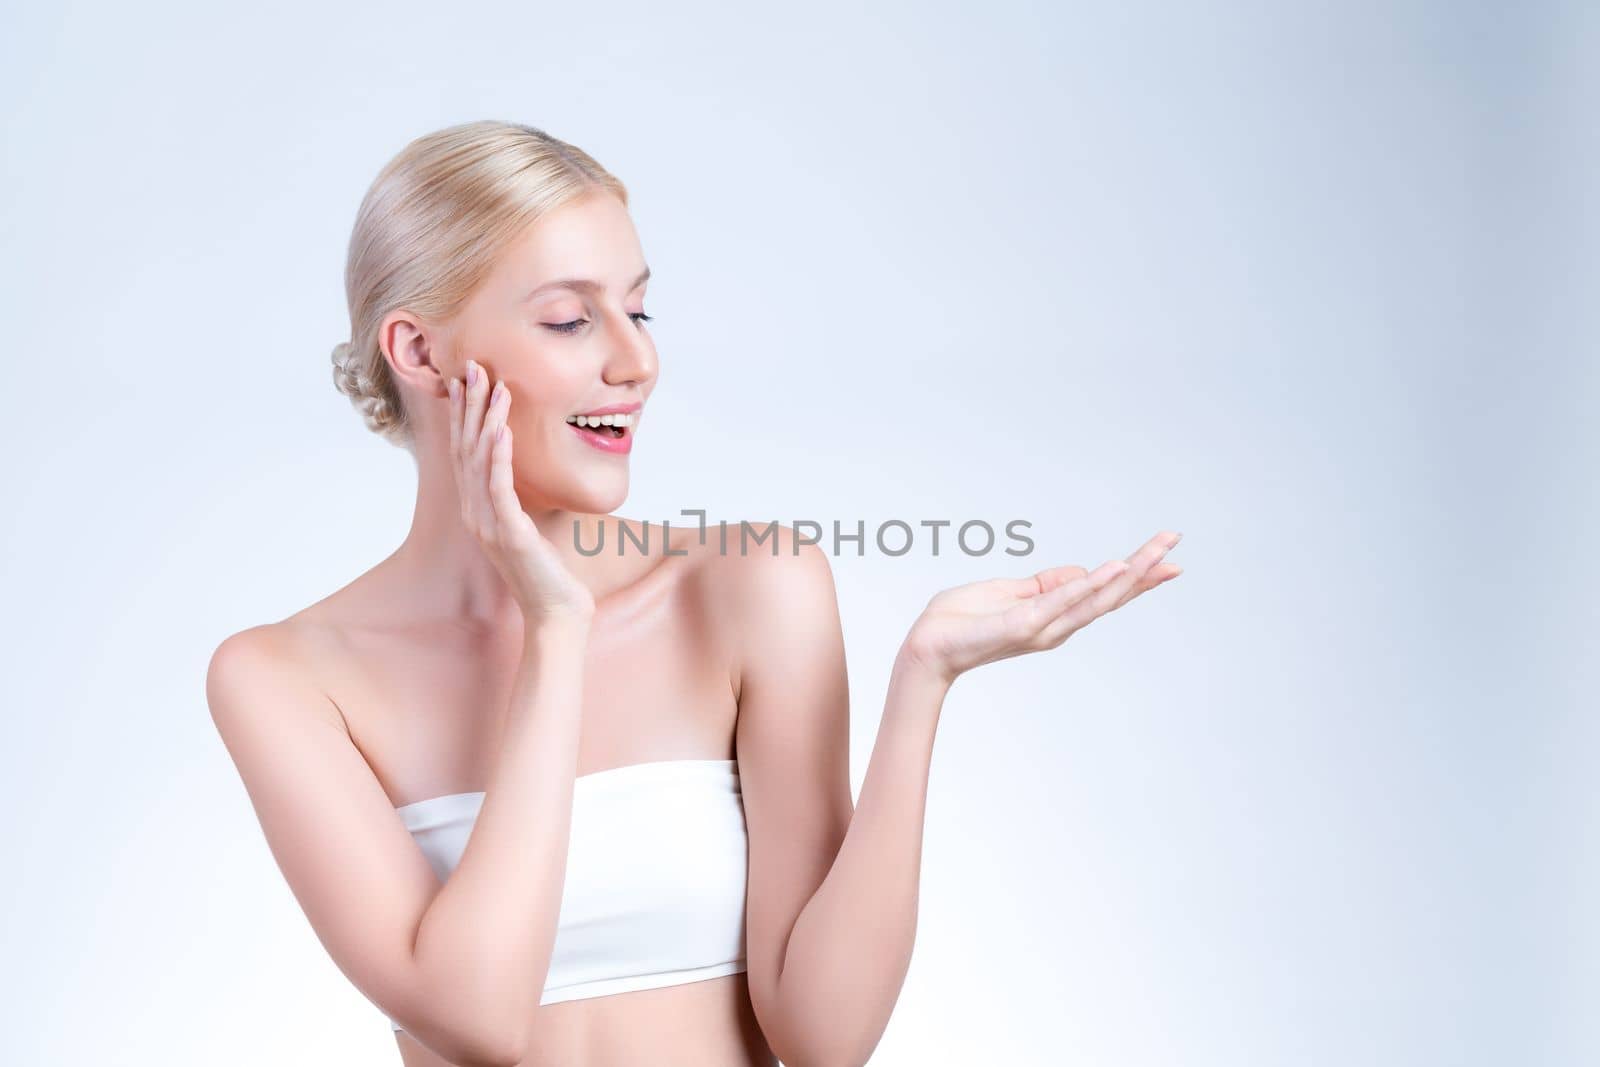 Personable beautiful woman with perfect smooth and clean skin portrait in isolated background. Beauty hand gesture with expressive facial expression for skincare treatment product or spa.